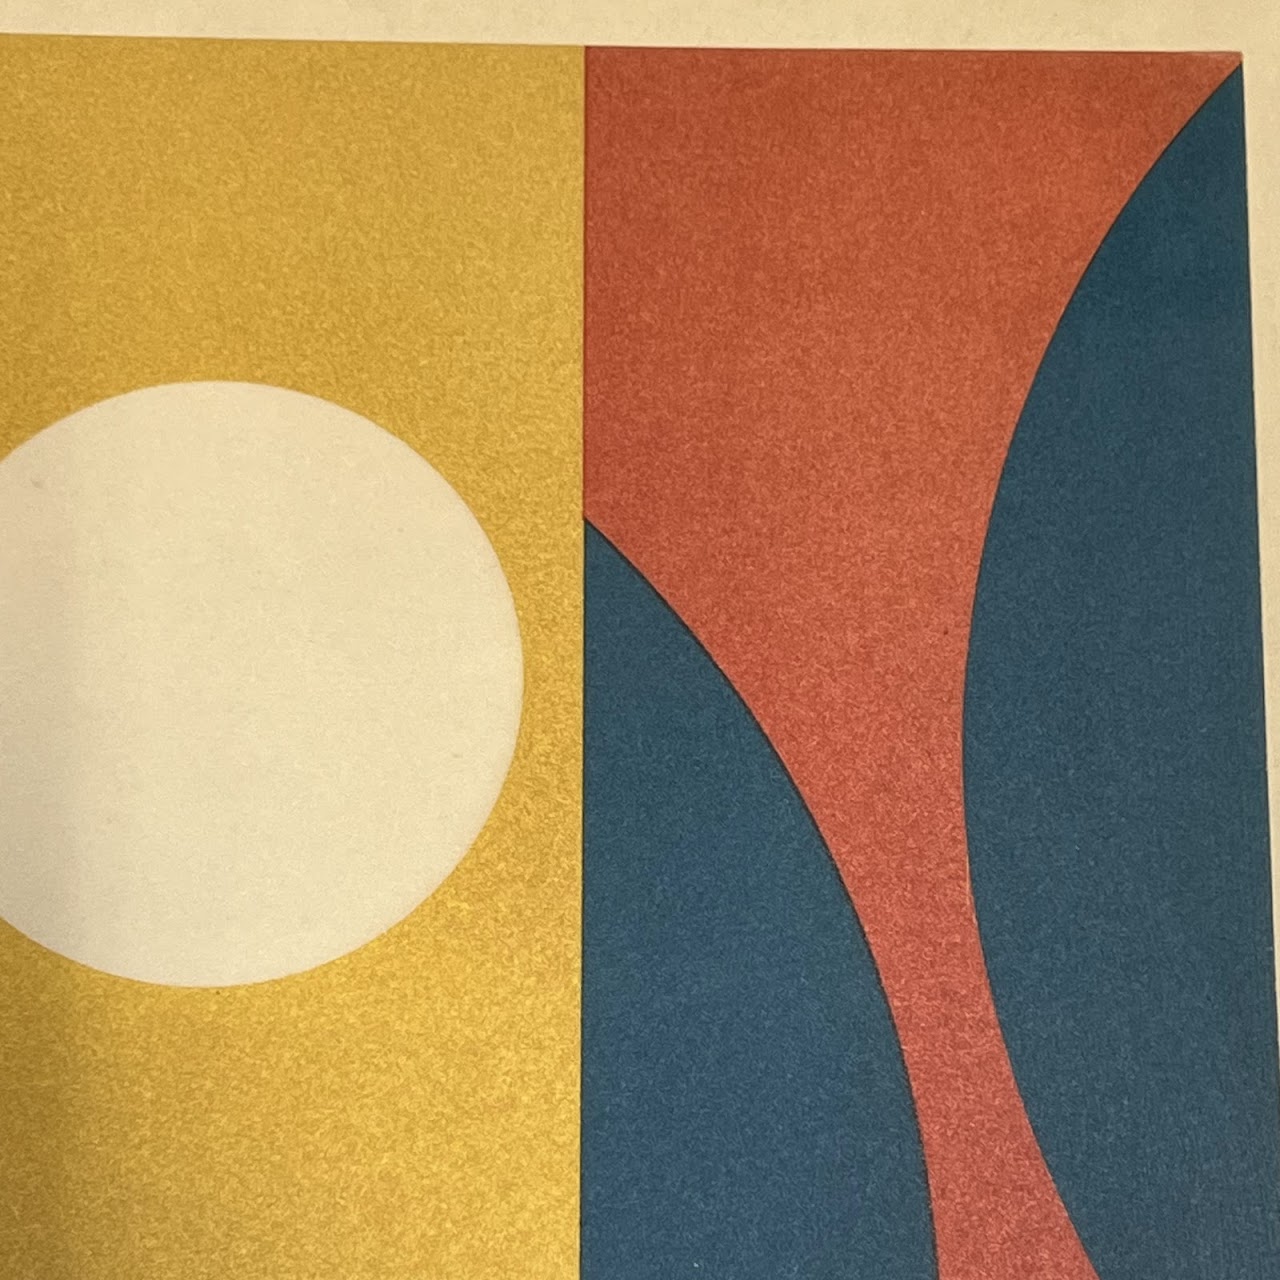 Leon Polk Smith 'Project for a Folding Screen, 1968' Signed Lithograph